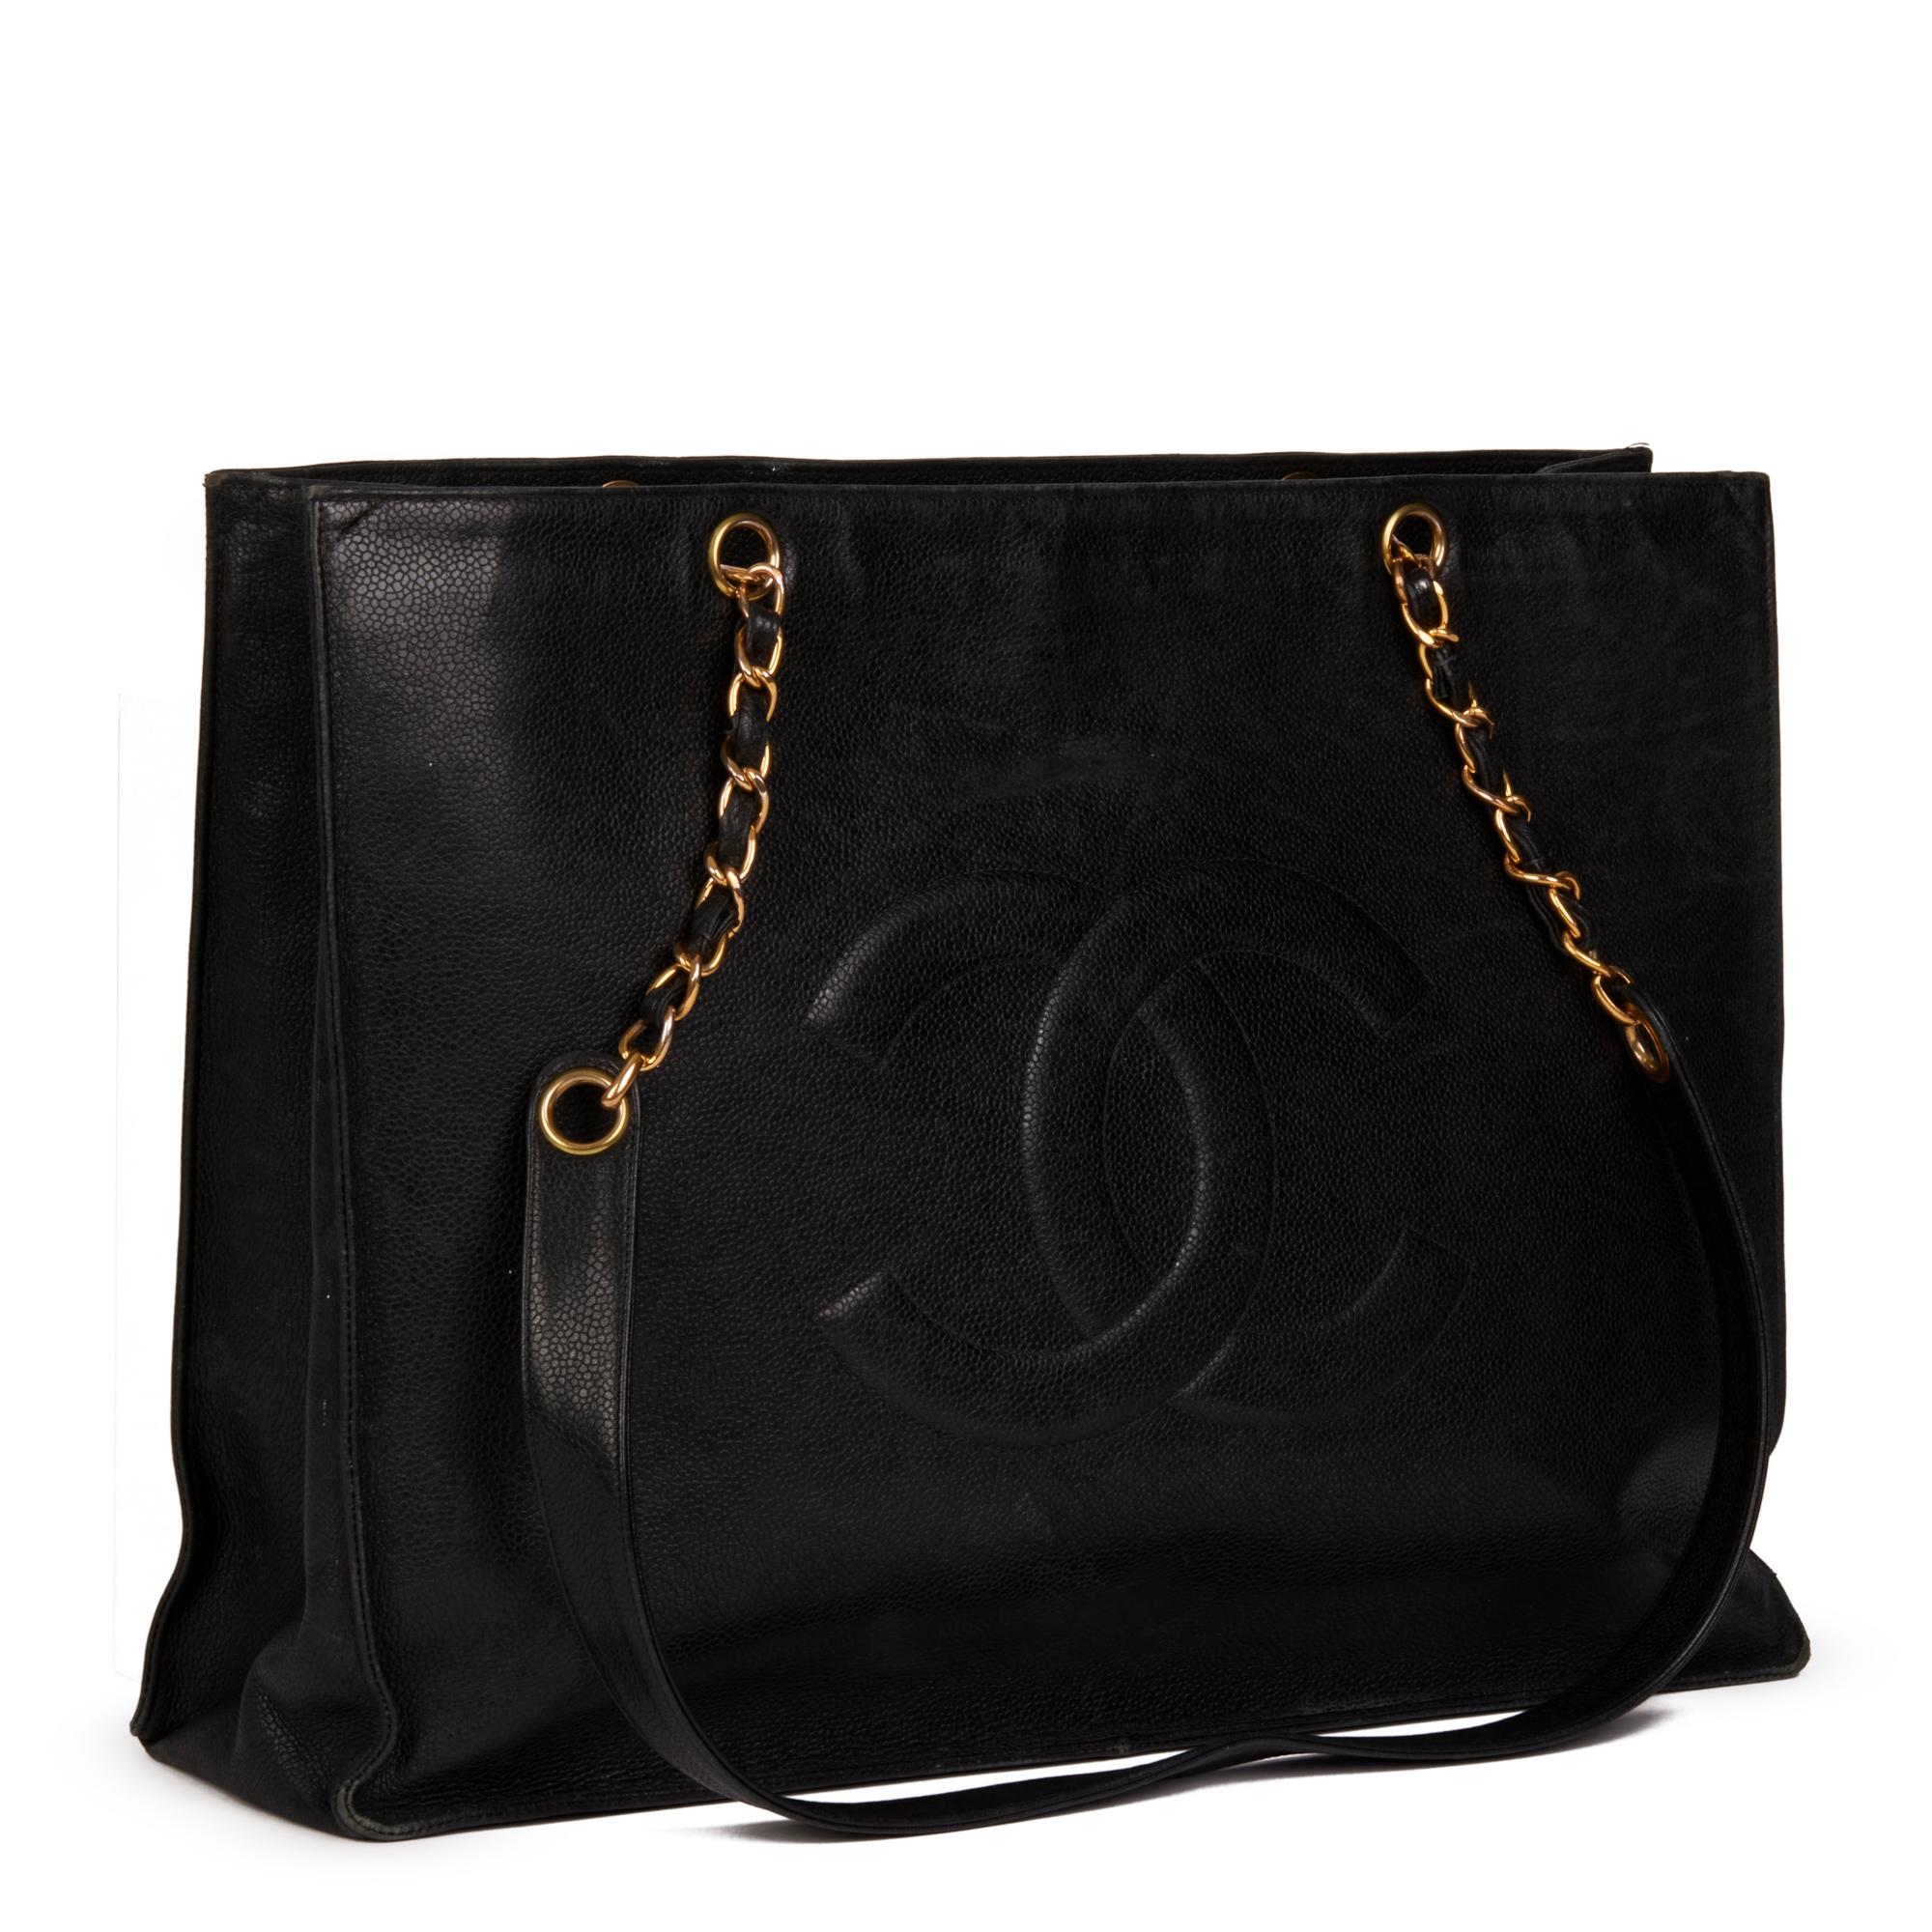 CHANEL
Black Caviar Leather Vintage Jumbo XL Timeless Shopping Tote

Xupes Reference: HB4414
Serial Number: UNREADABLE
Age (Circa): 1990
Authenticity Details: (Made in France)
Gender: Ladies
Type: Shoulder, Tote

Colour: Black
Hardware: